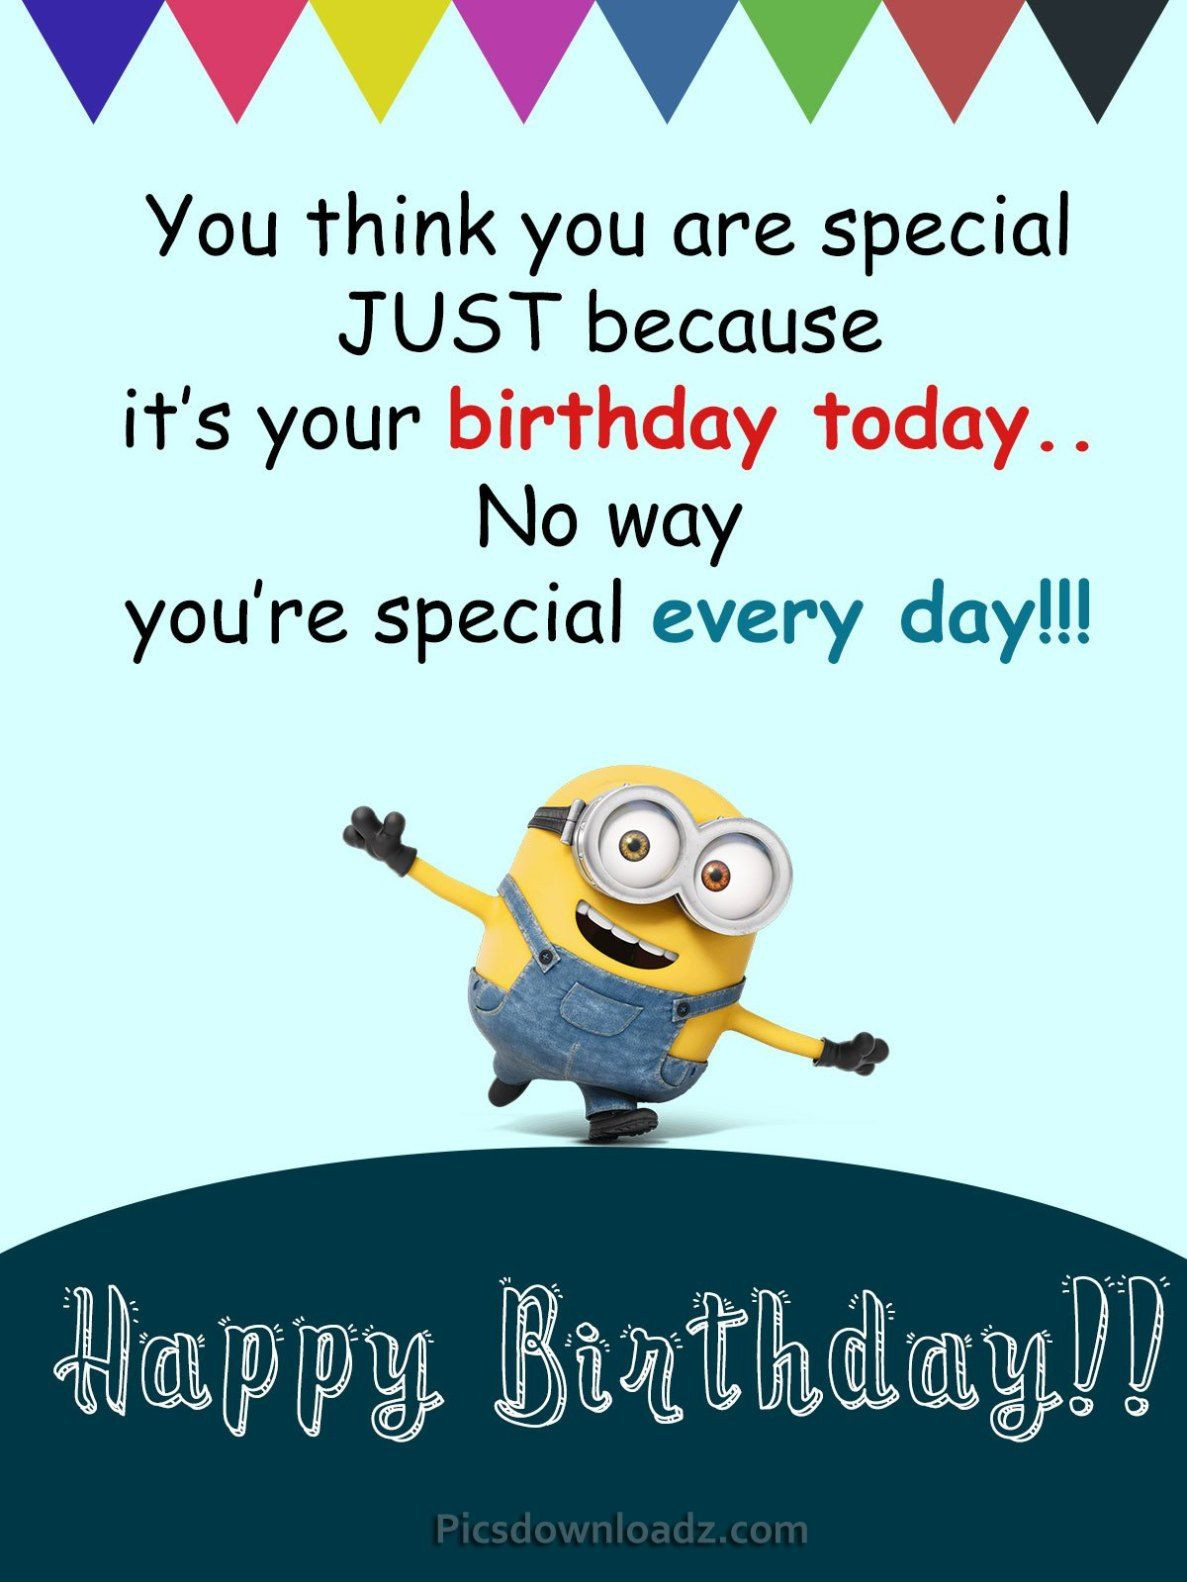 Happy Birthday Wishes For Friend Funny
 Funny Happy Birthday Wishes for Best Friend – Happy